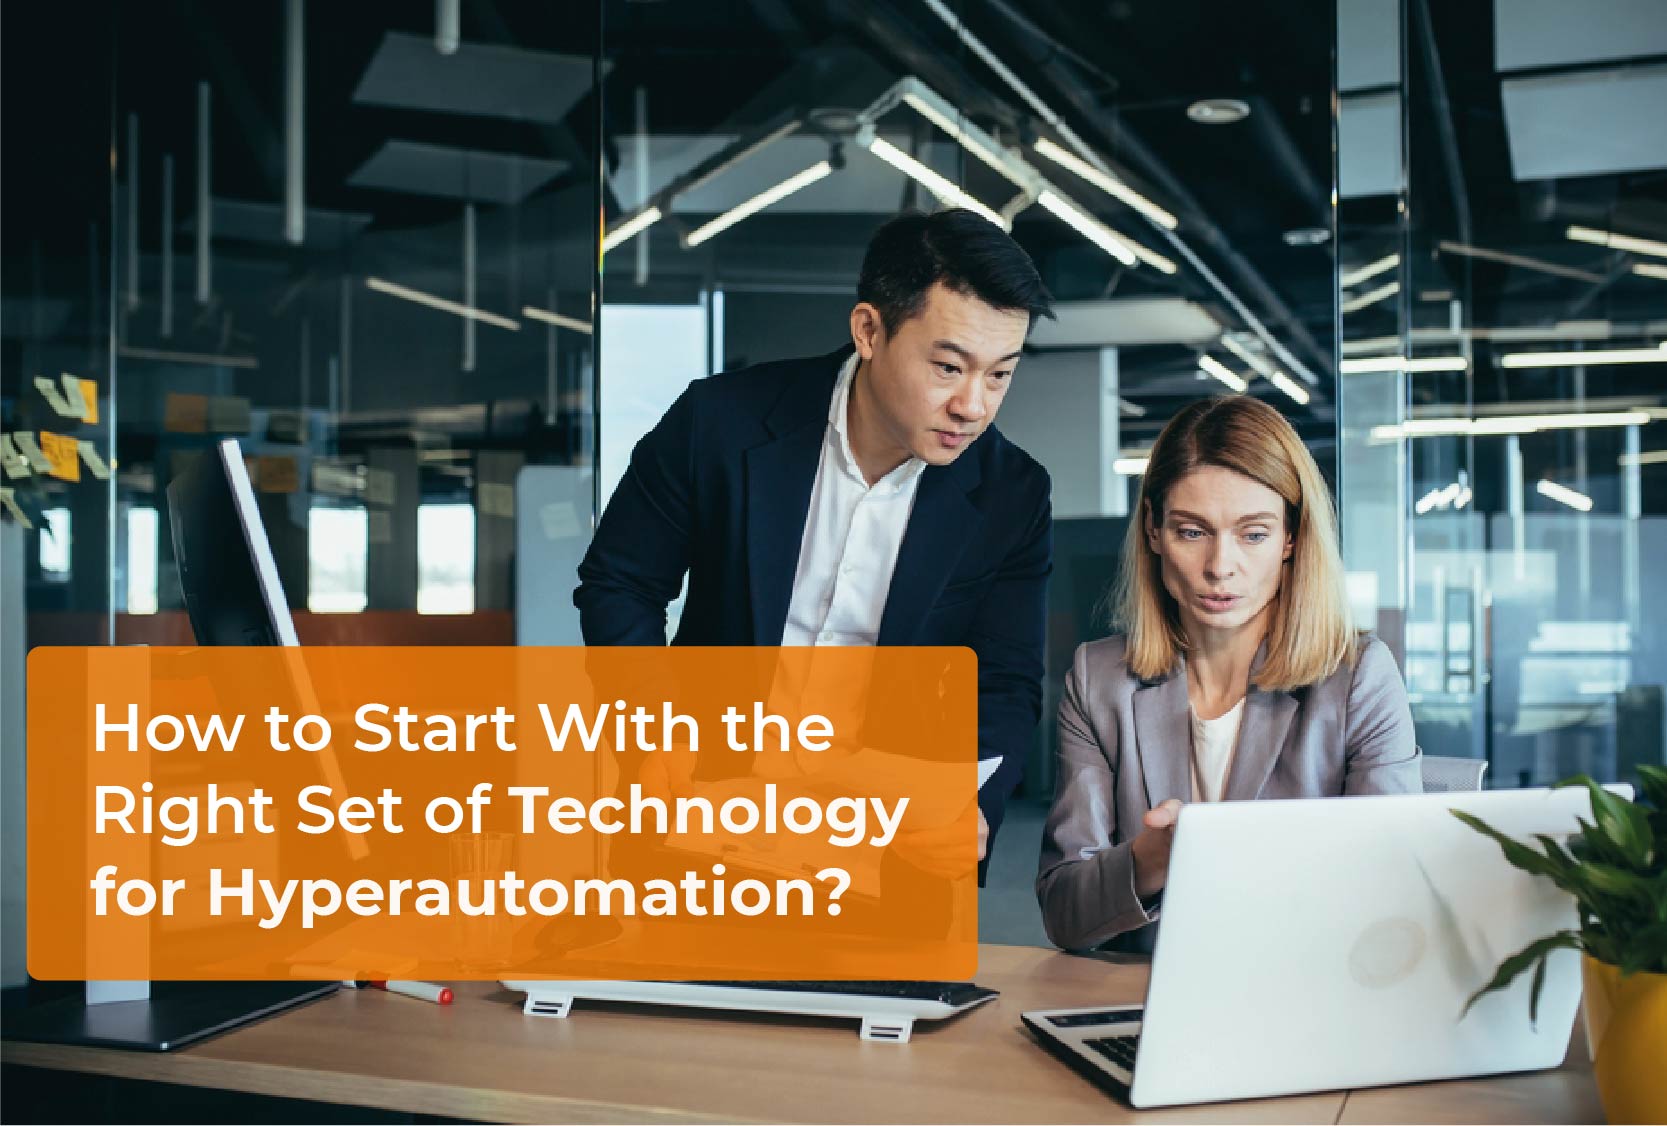 How to Start With the Right Set of Technology for Hyperautomation?